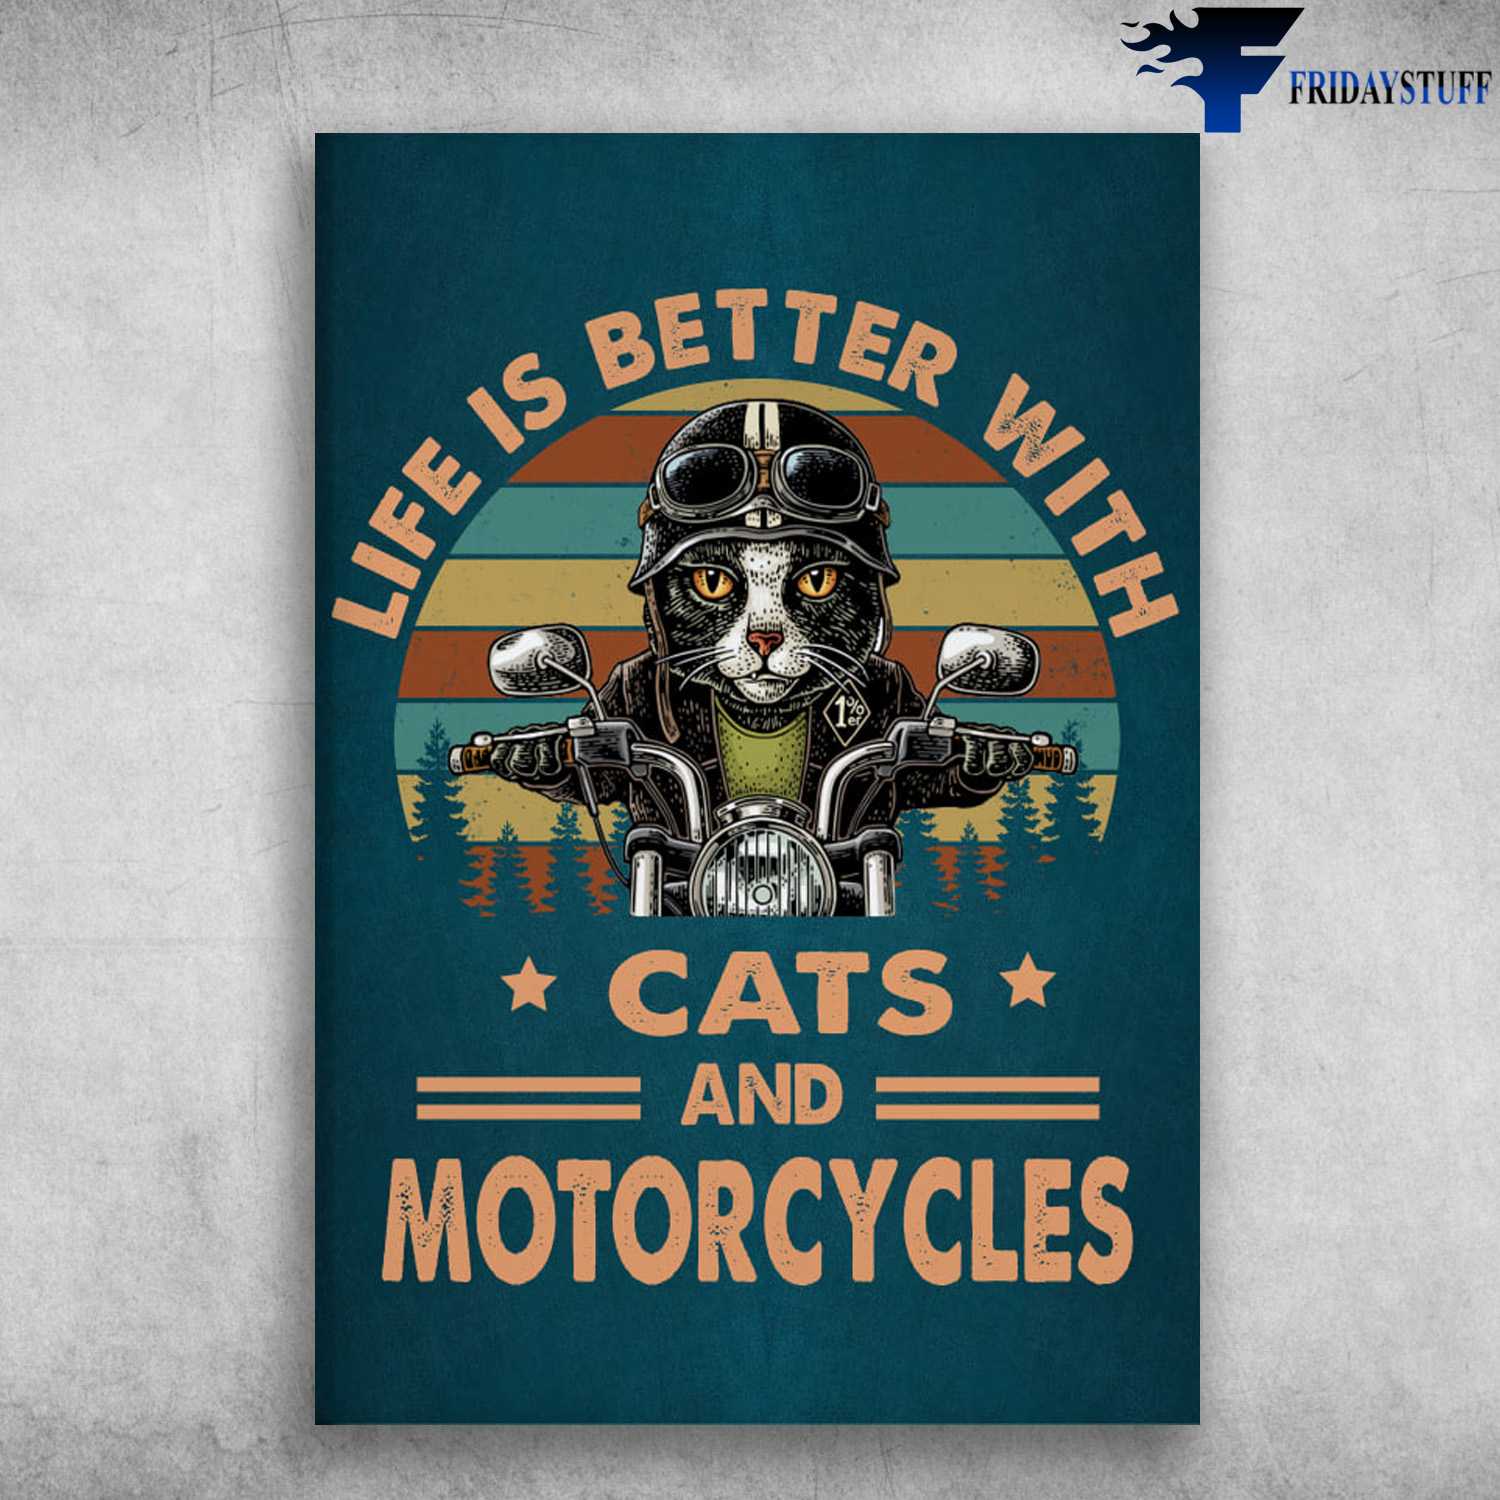 Motorcycle Cat, Black Cat Riding - Life Is Better With, Cats Anf Motorcycles